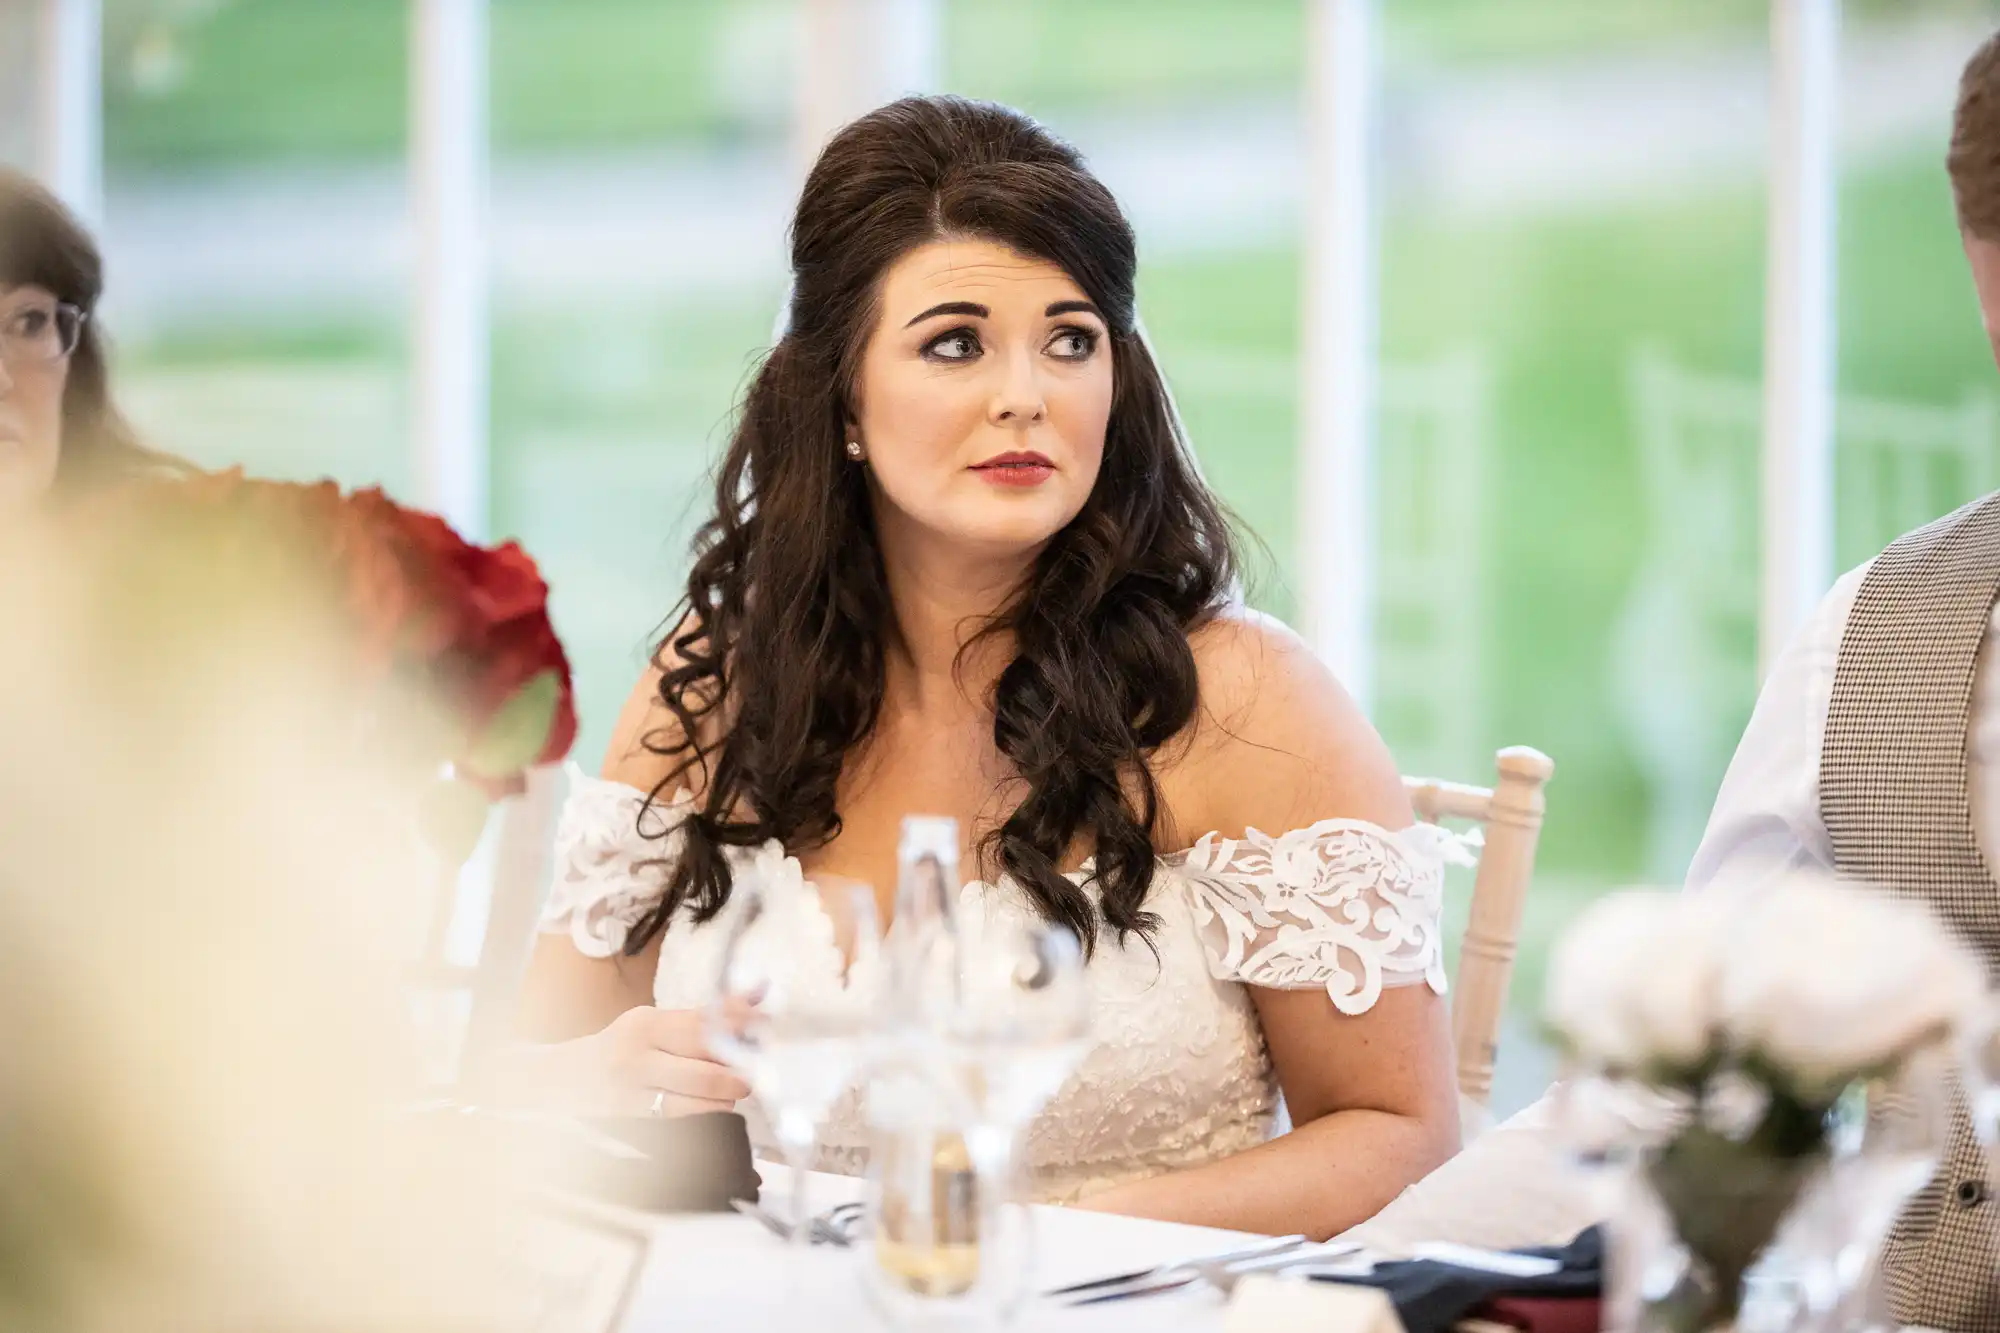 A woman in a white wedding dress sits at a table, looking to her left with a pensive expression. Glasses and flowers are on the table in front of her.